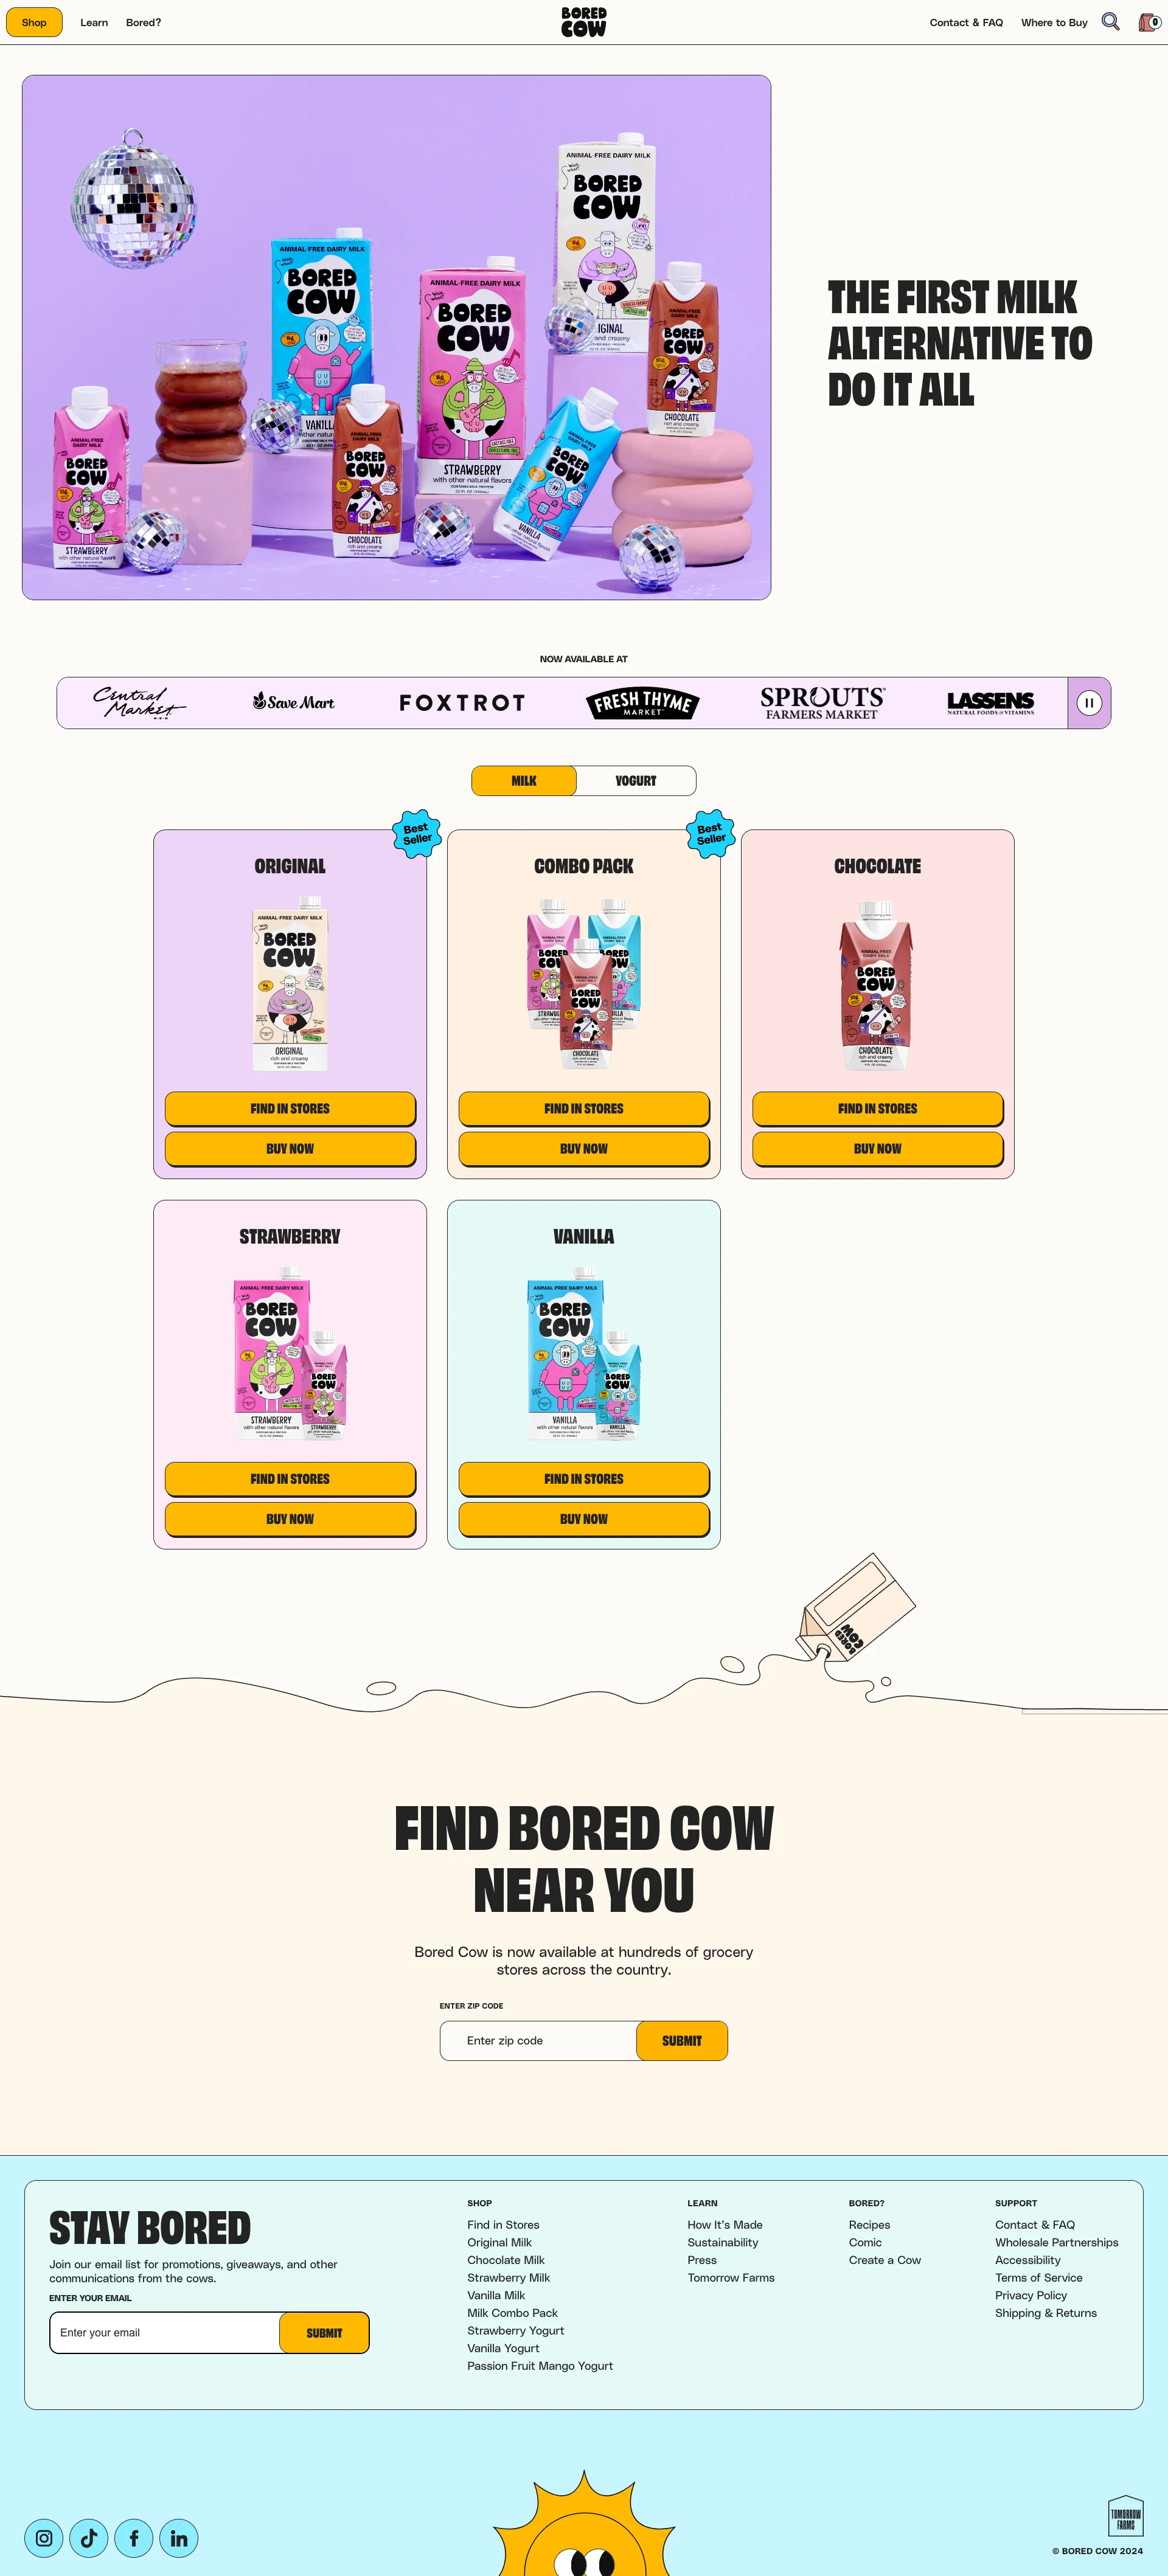 Bored Cow Landing Page Example: Looking for a better milk alternative? Bored Cow looks, feels, tastes, and acts just like dairy. The difference? Ours is lactose free, cholesterol free, and cruelty free. Did we mention it's packed with protein, calcium, and vitamins too? Give cows a break!